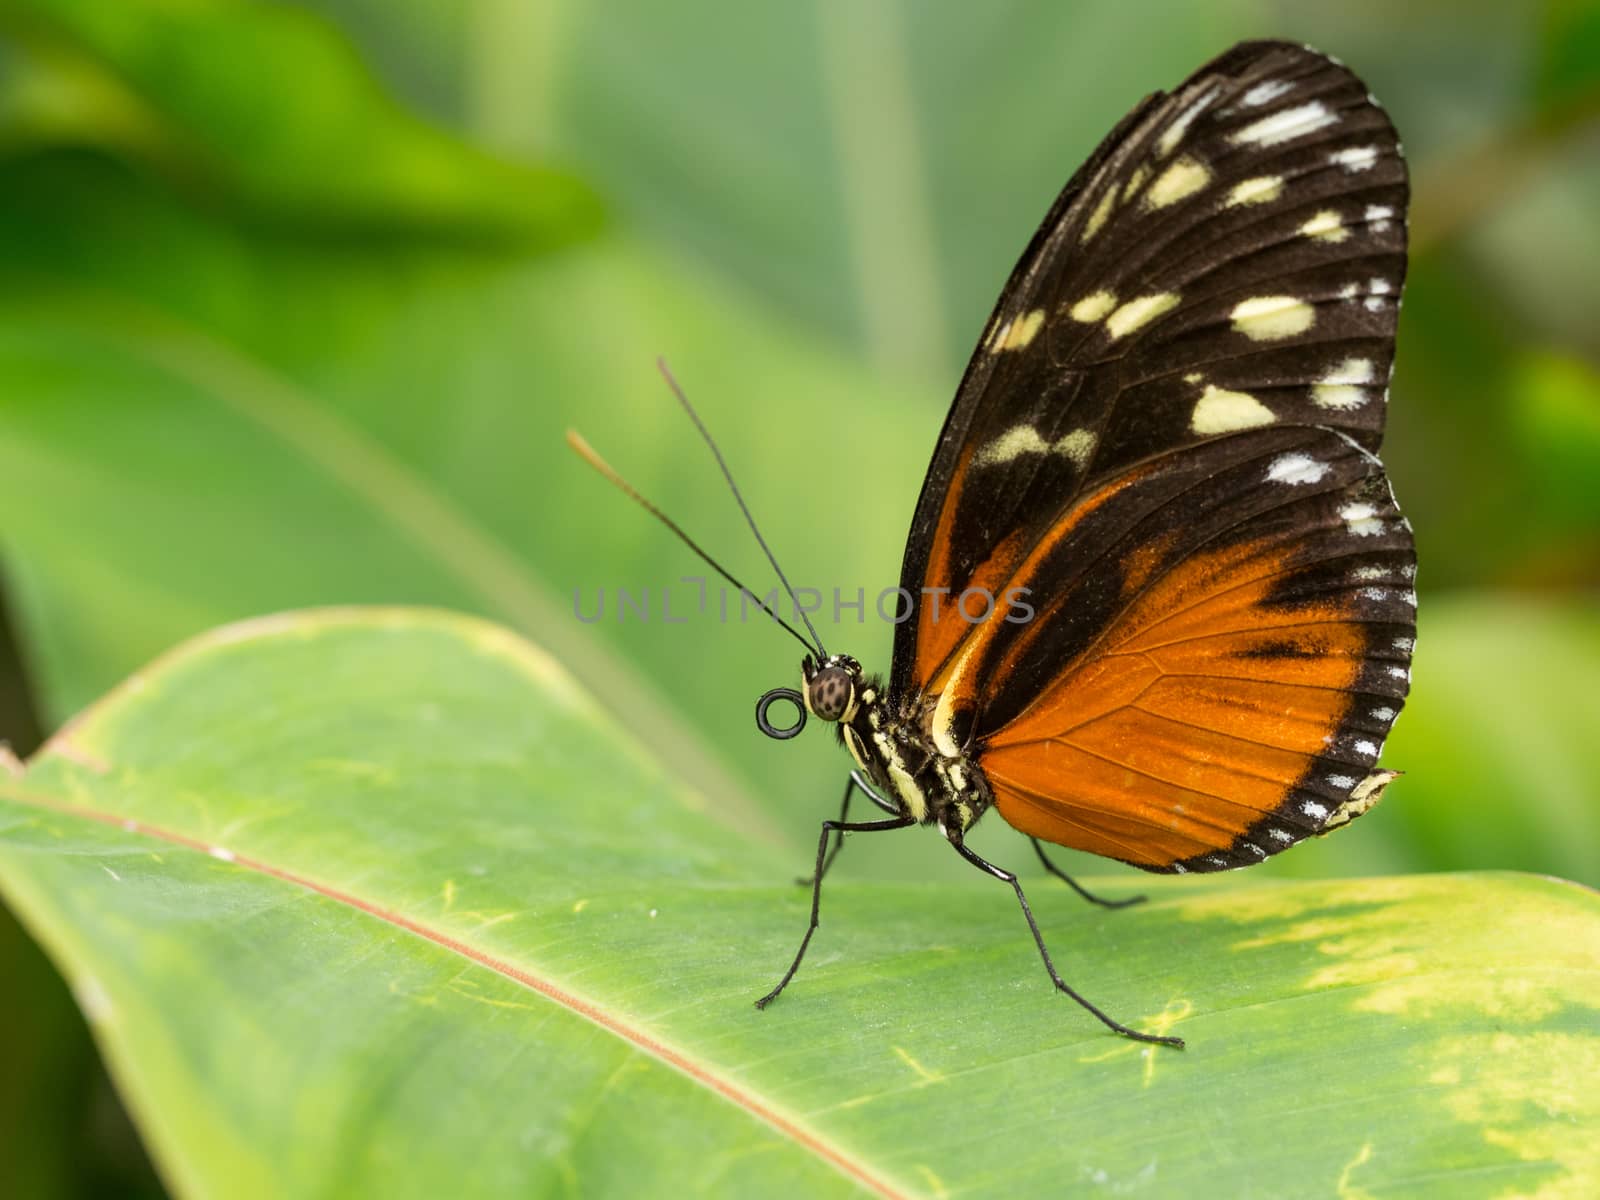 Black and orange spotted butterfly standing on leaf